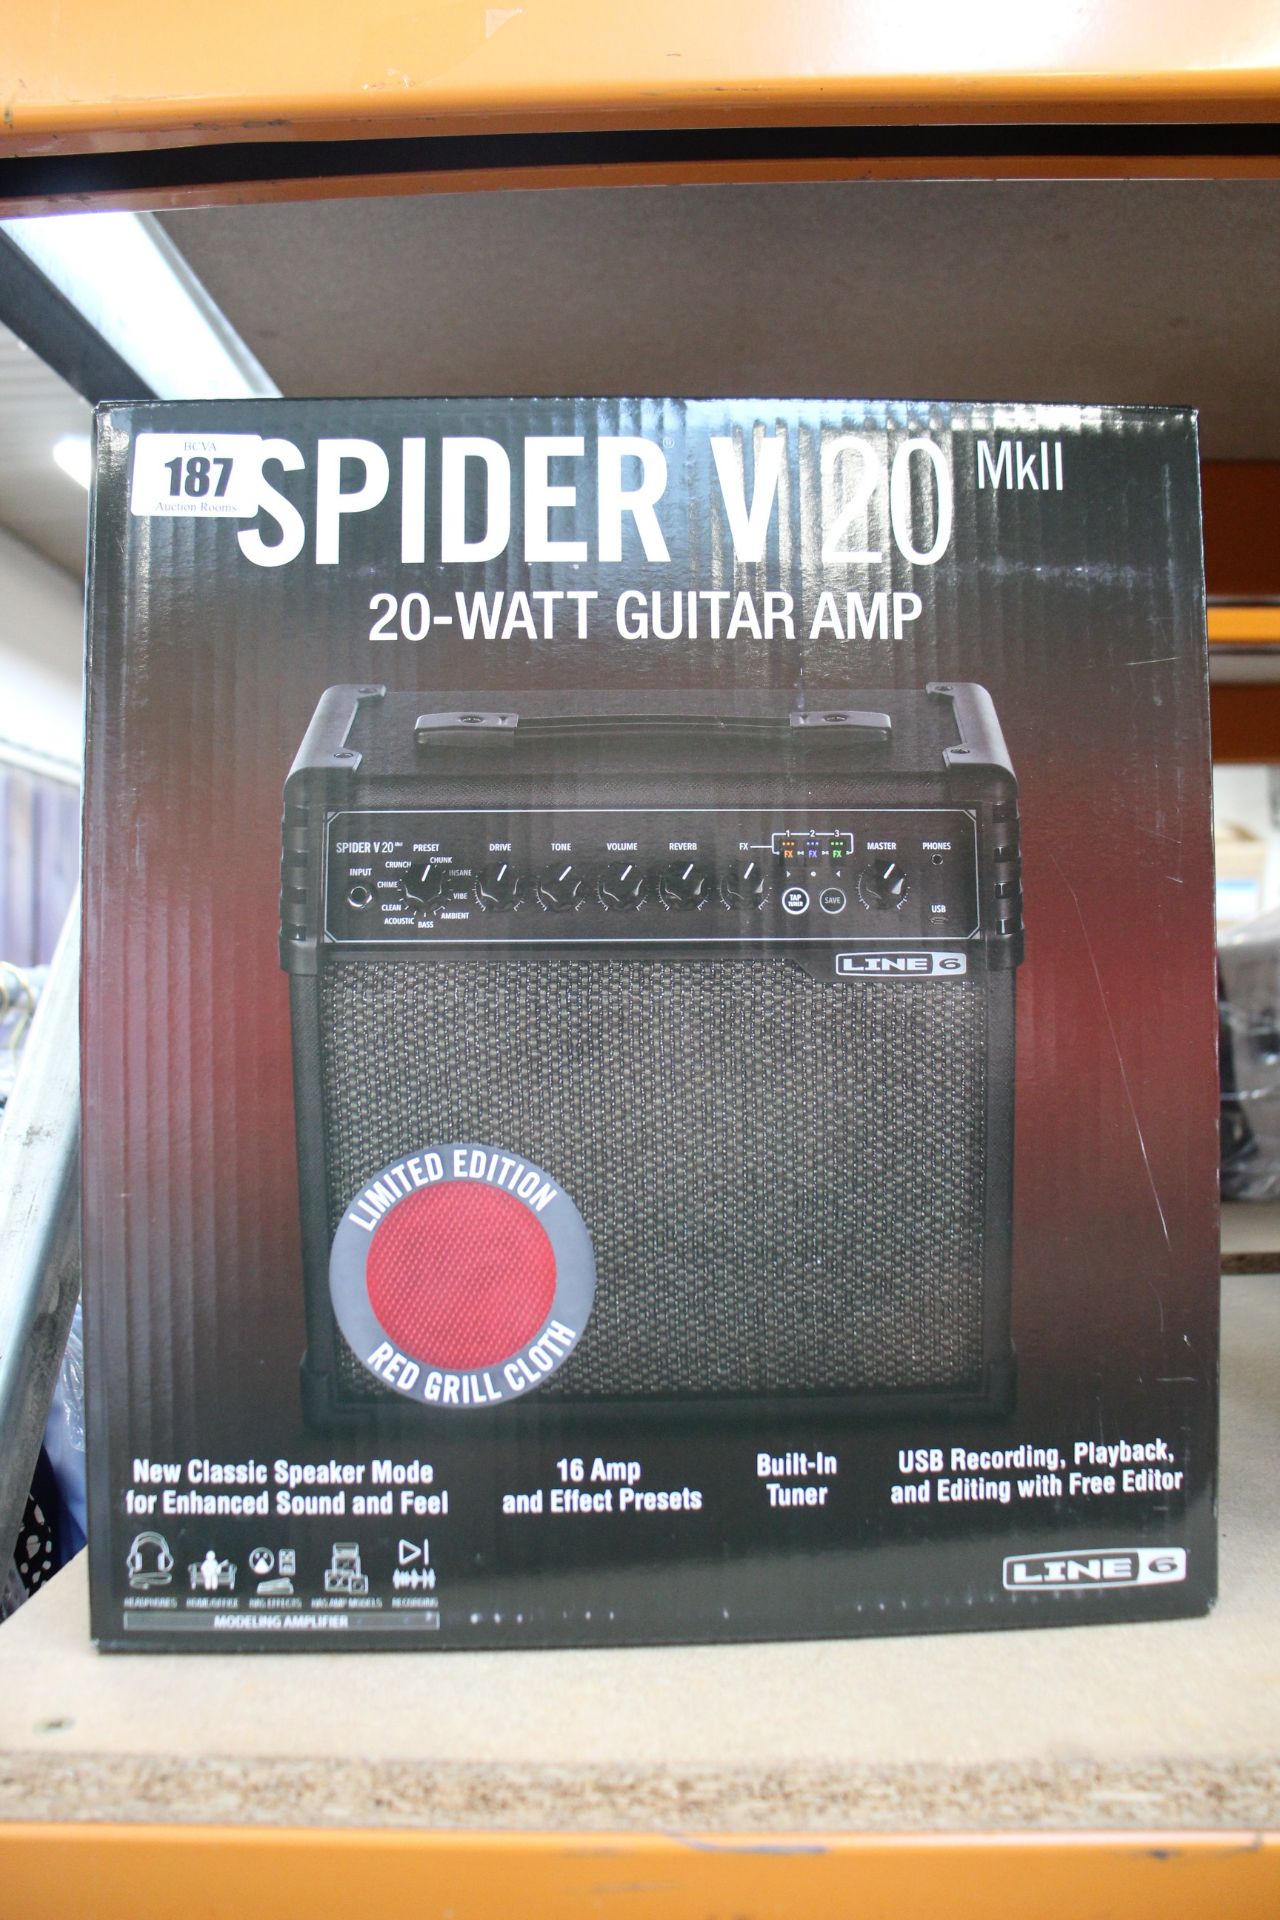 A boxed as new Line 6 - Spider V 20 MkII Guitar Amp (Limited Edition Red Grill Cloth).